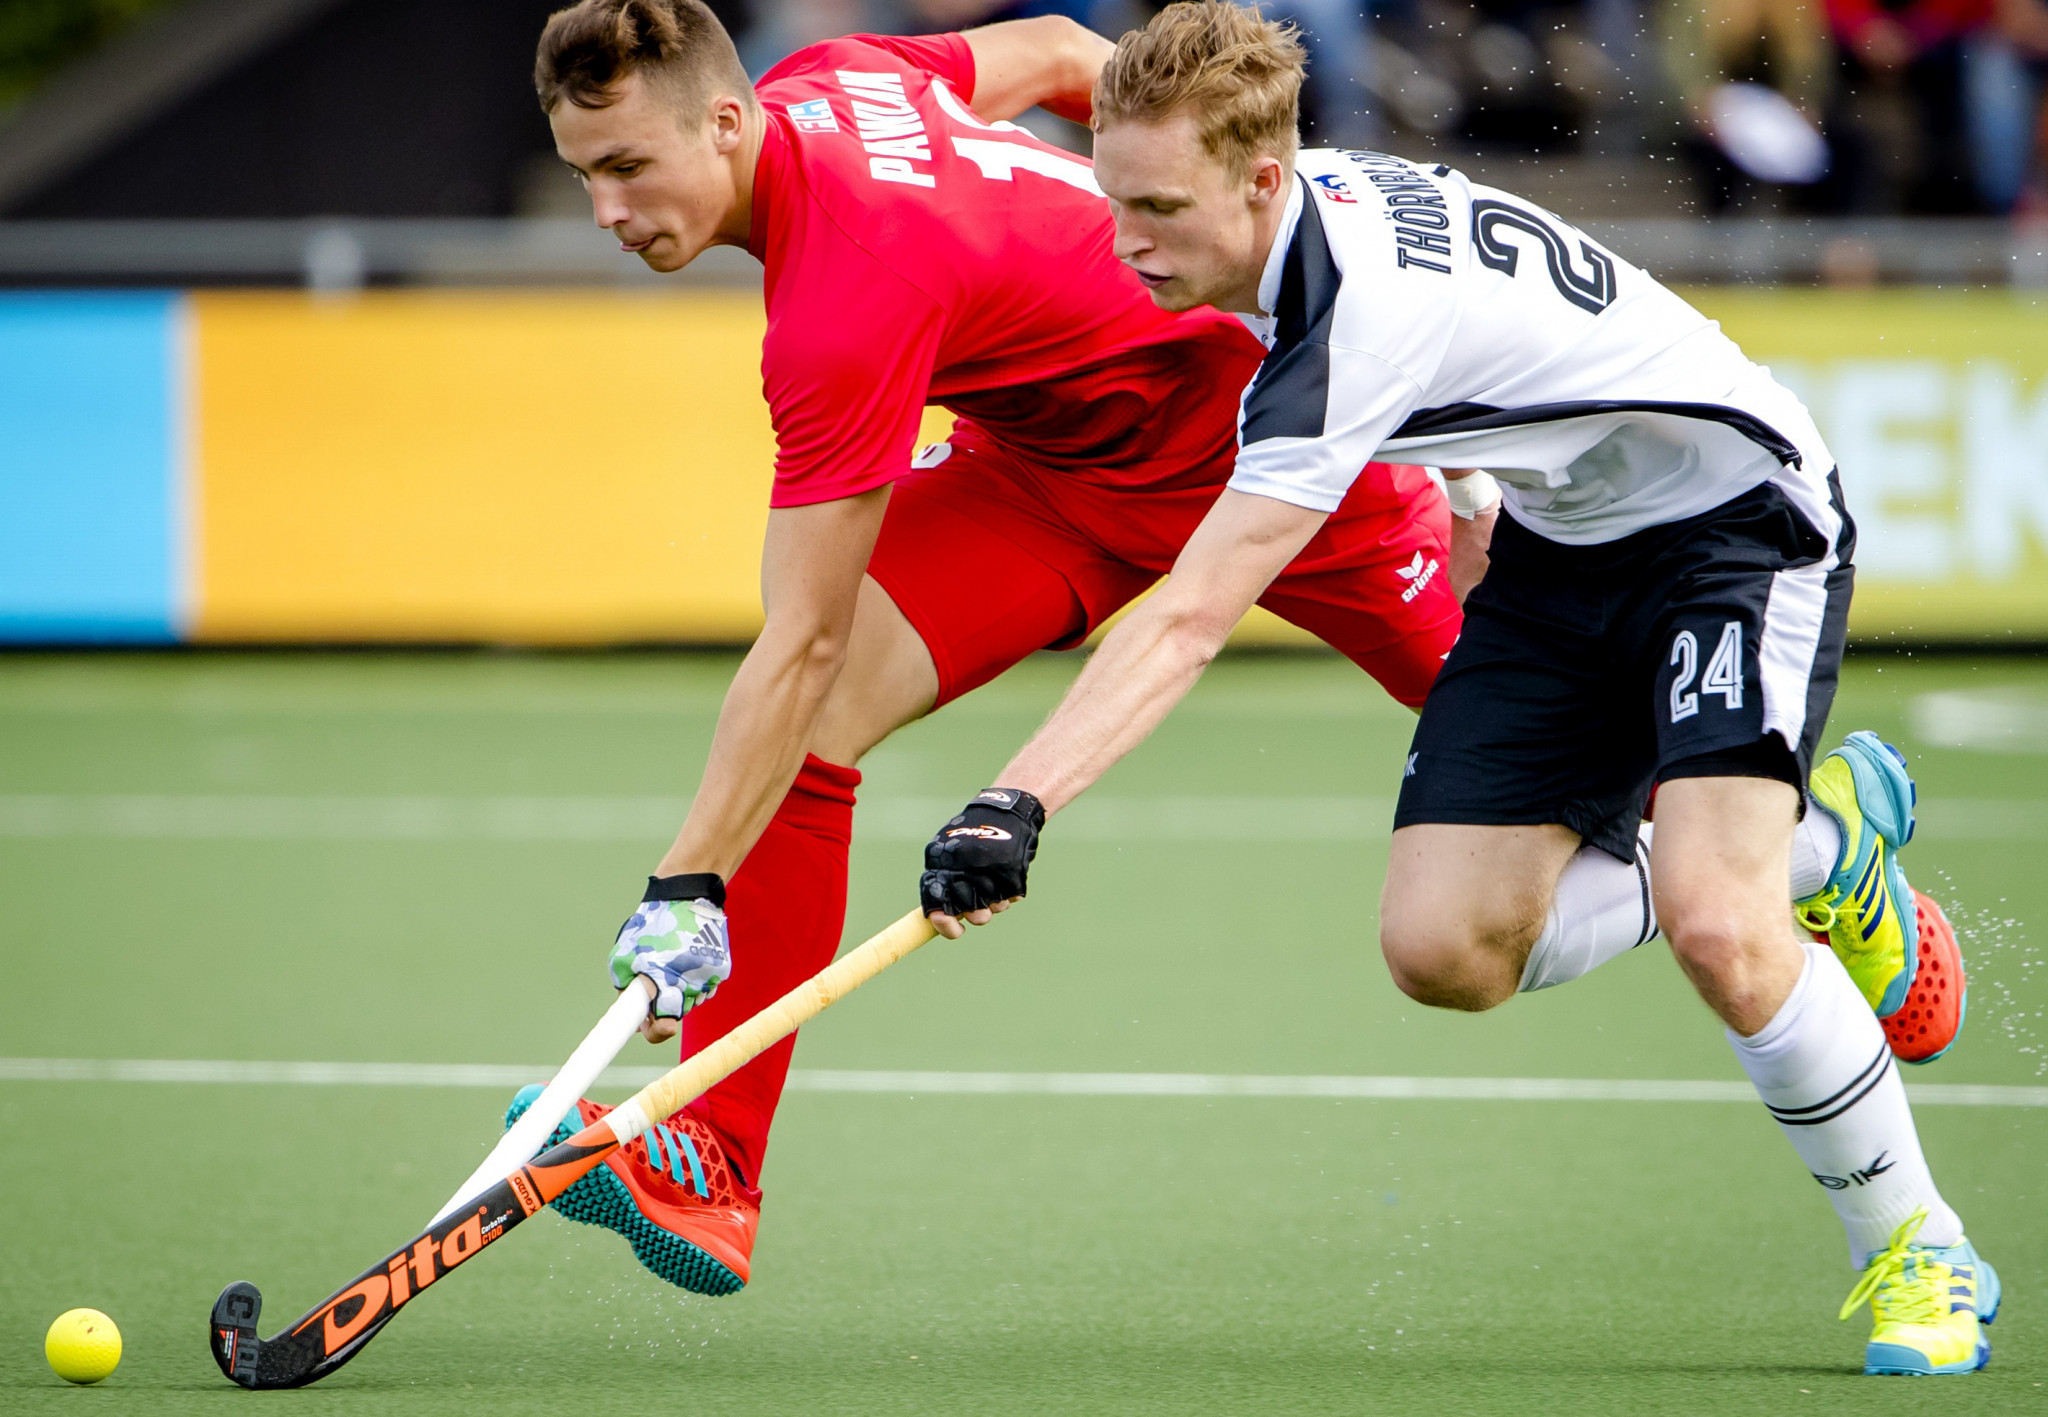 Poland and Uruguay top the tables after first day of Hockey5s event in Lausanne